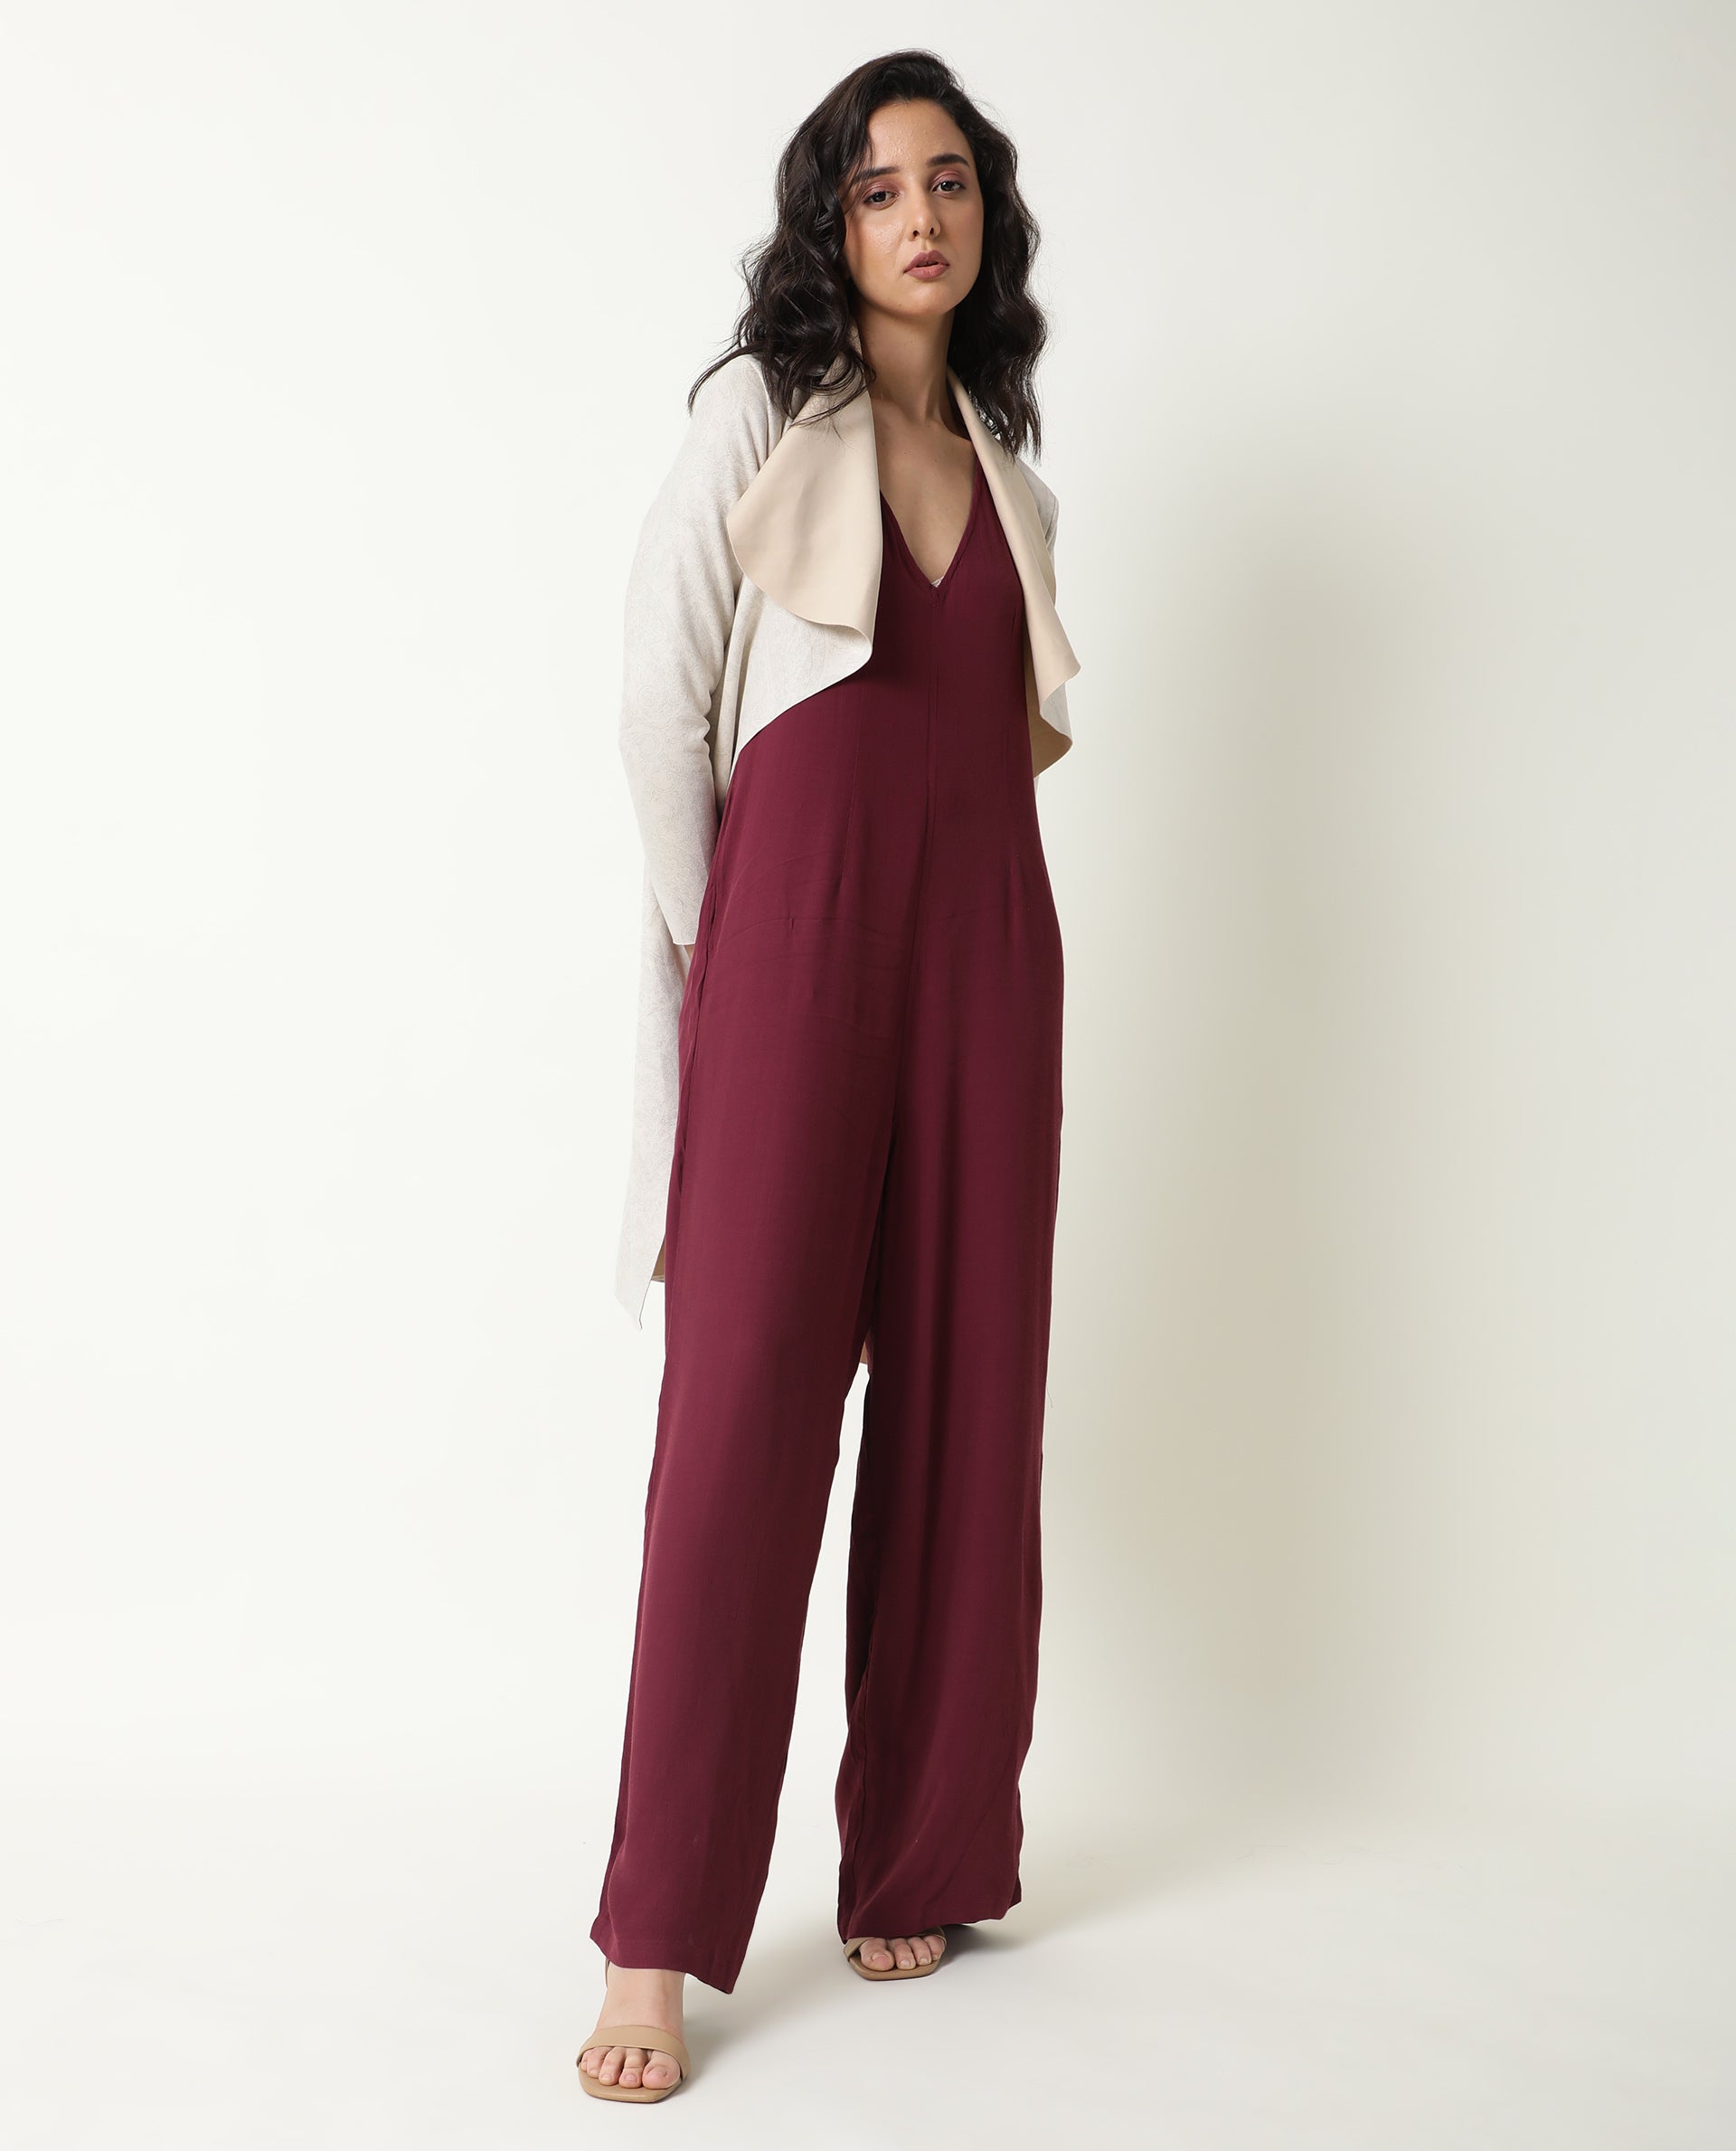 Jumpsuits & Co-ords | Brand New Knee Length Jumpsuit | Freeup